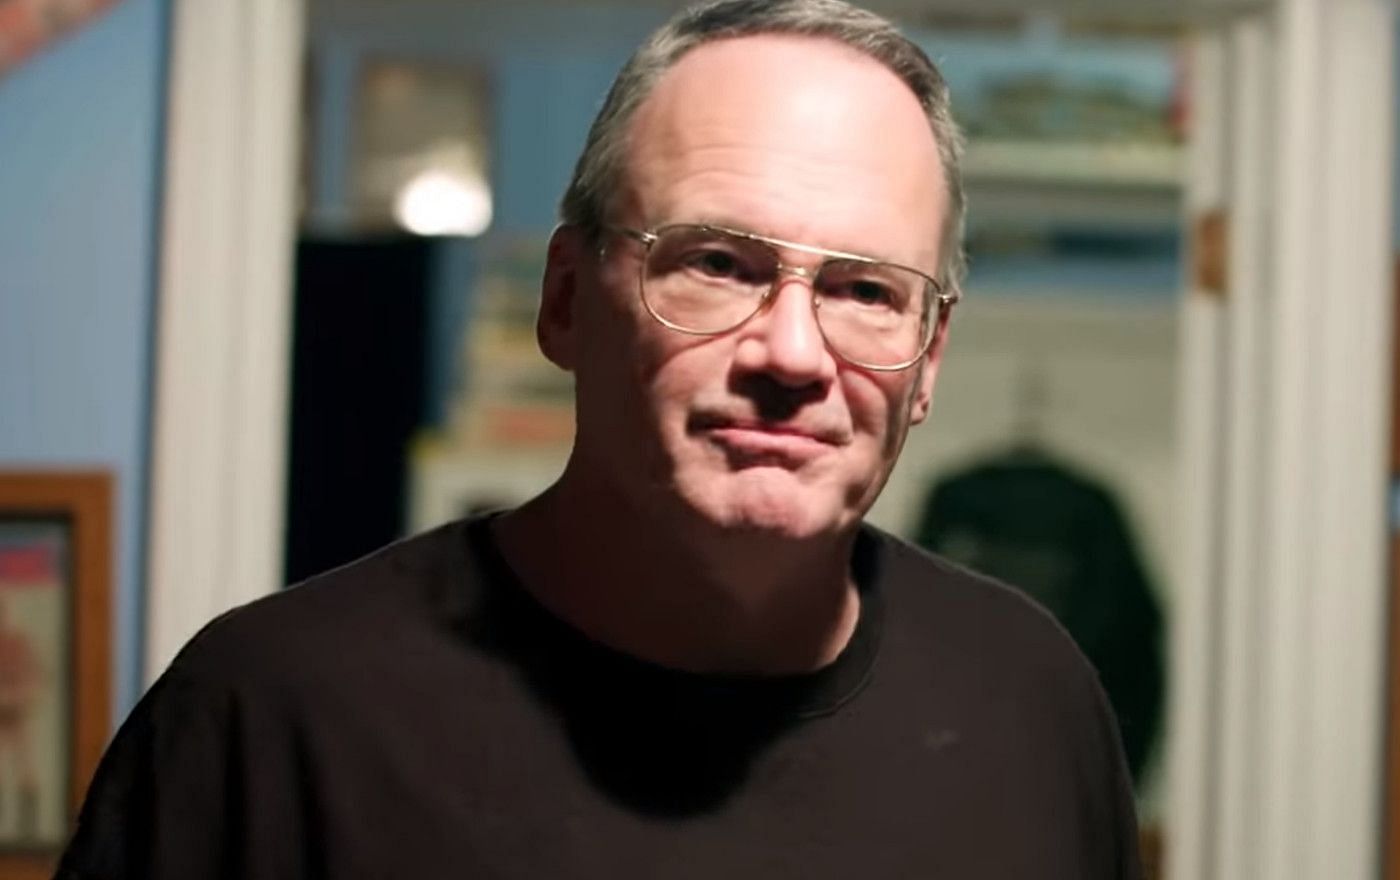 Jim Cornette believes a top babyface would be better served as a heel